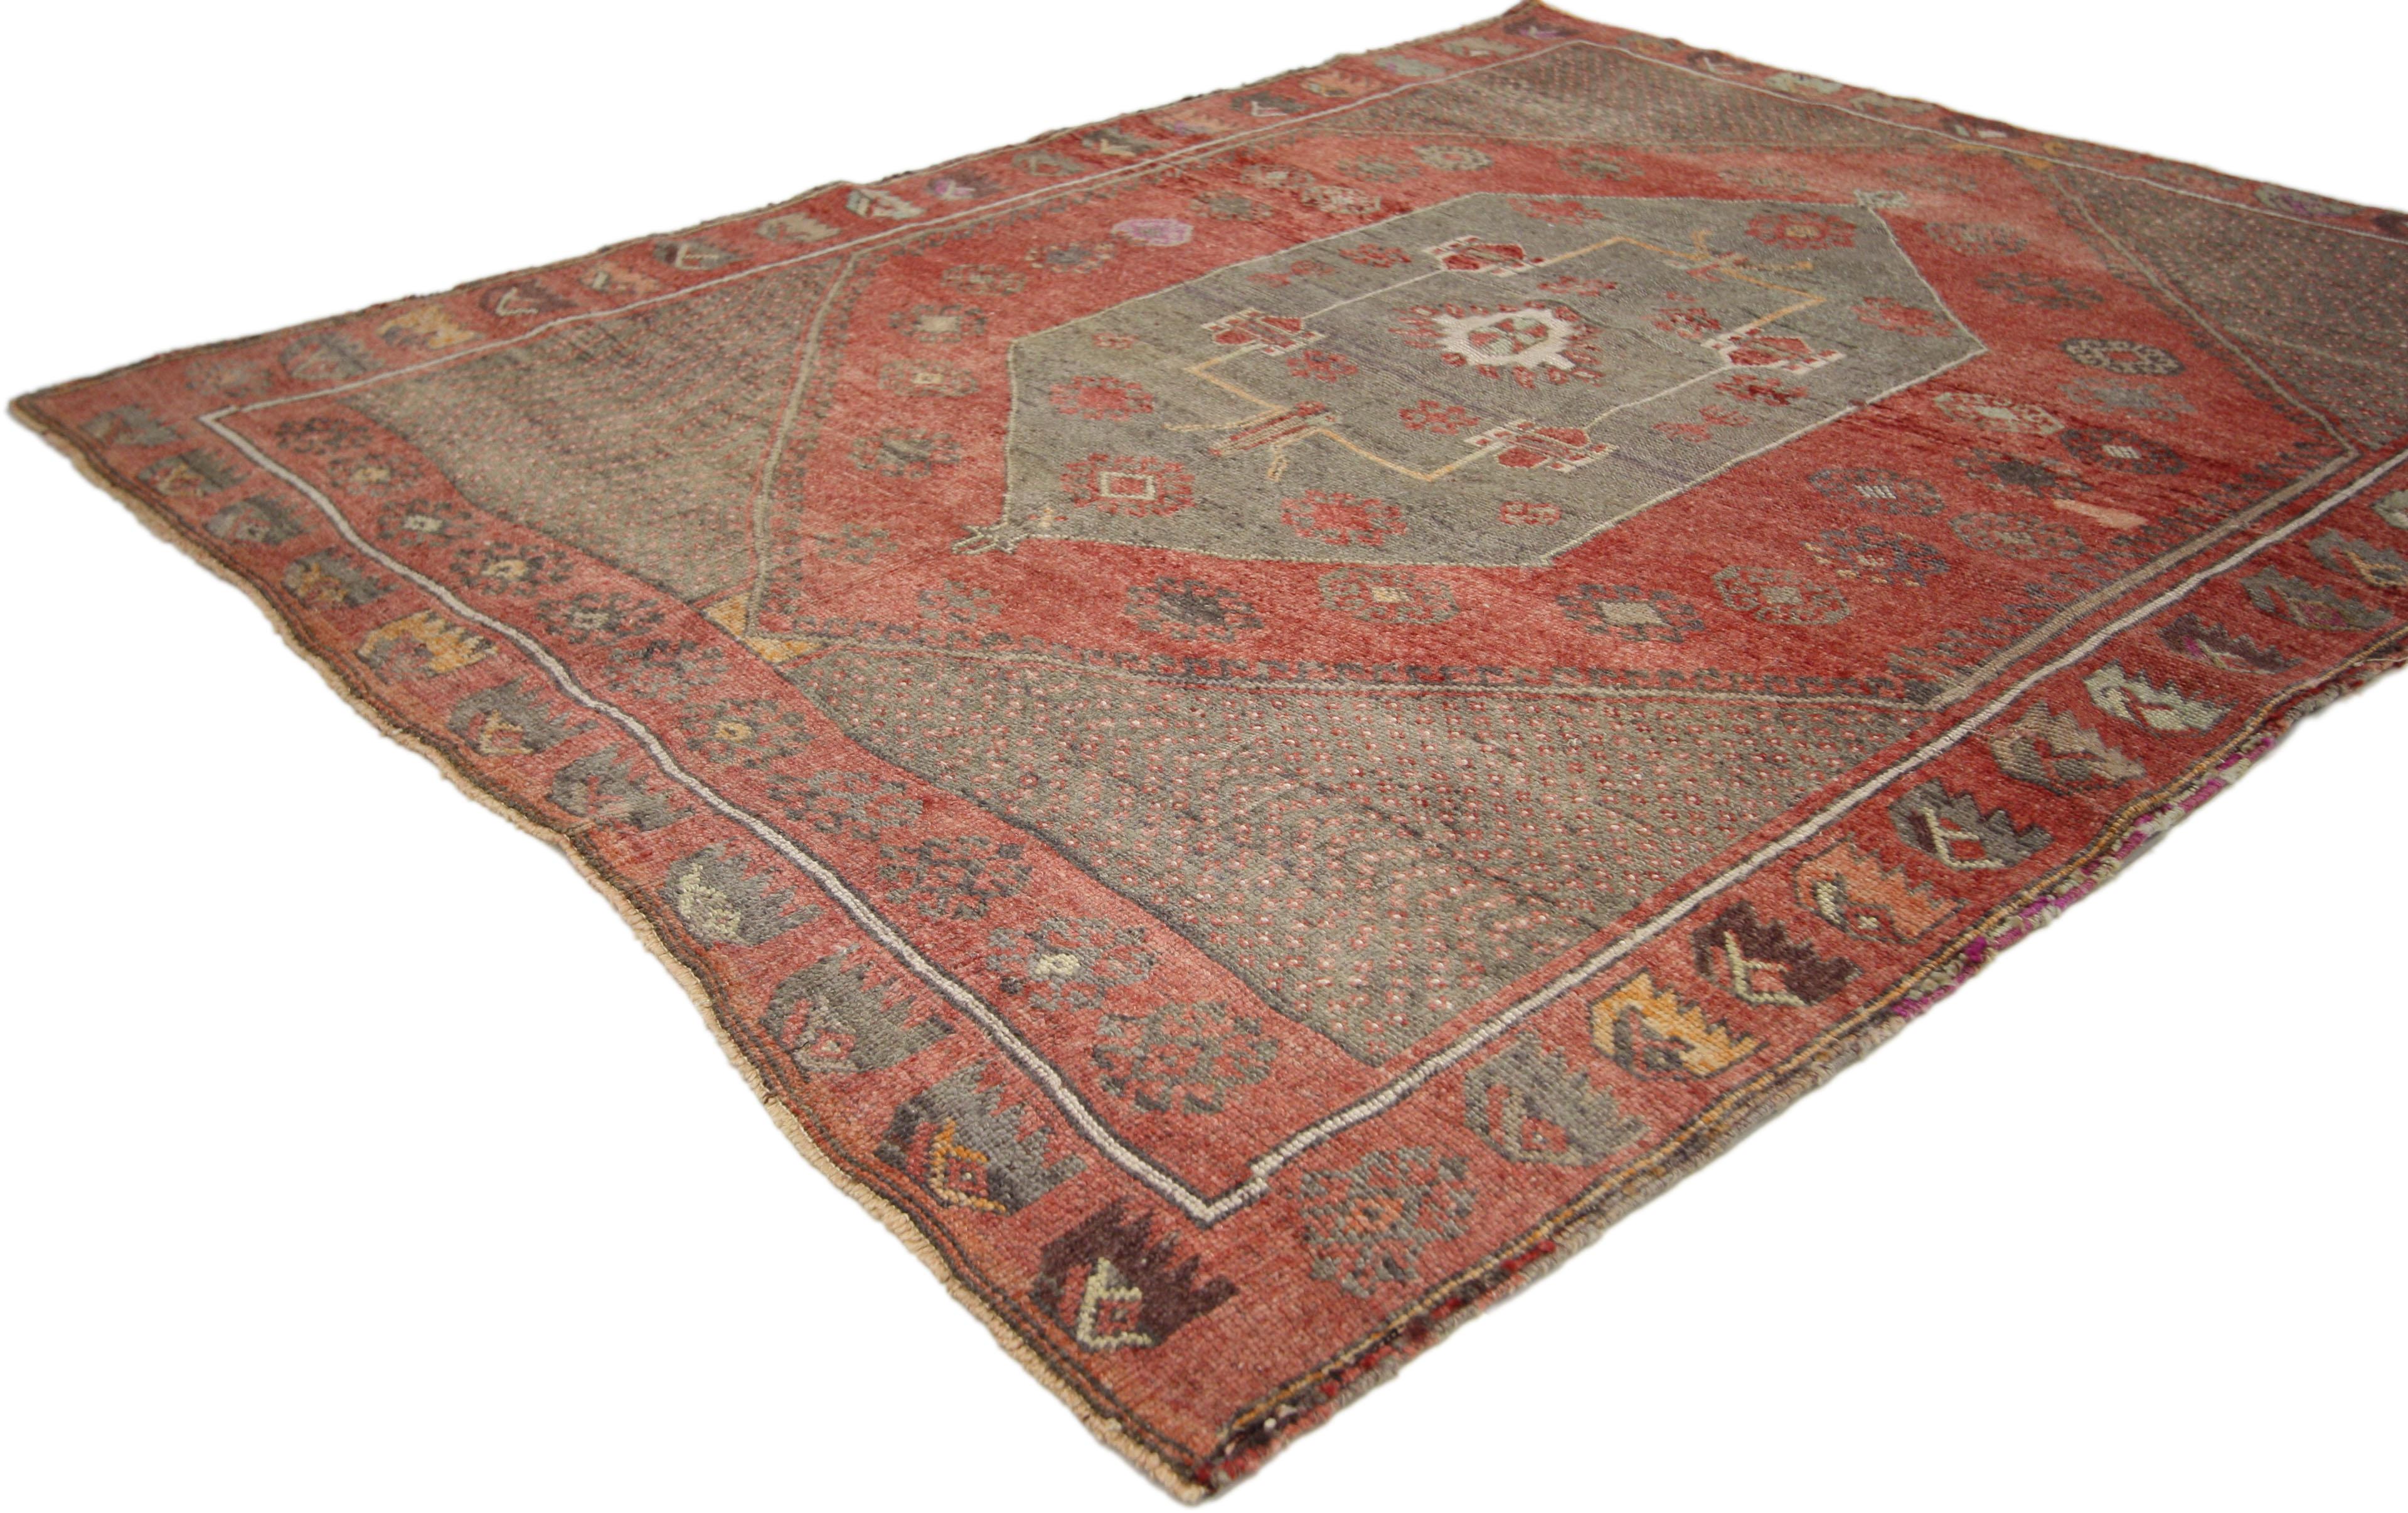 52334 Rustic style distressed vintage Turkish Oushak rug 04'03 x 05'01. The hand knotted vintage Turkish Oushak rug features an abrashed dark gray medallion flanked with palmette finials surrounded by scorpion motifs, ram's Horn and secondary